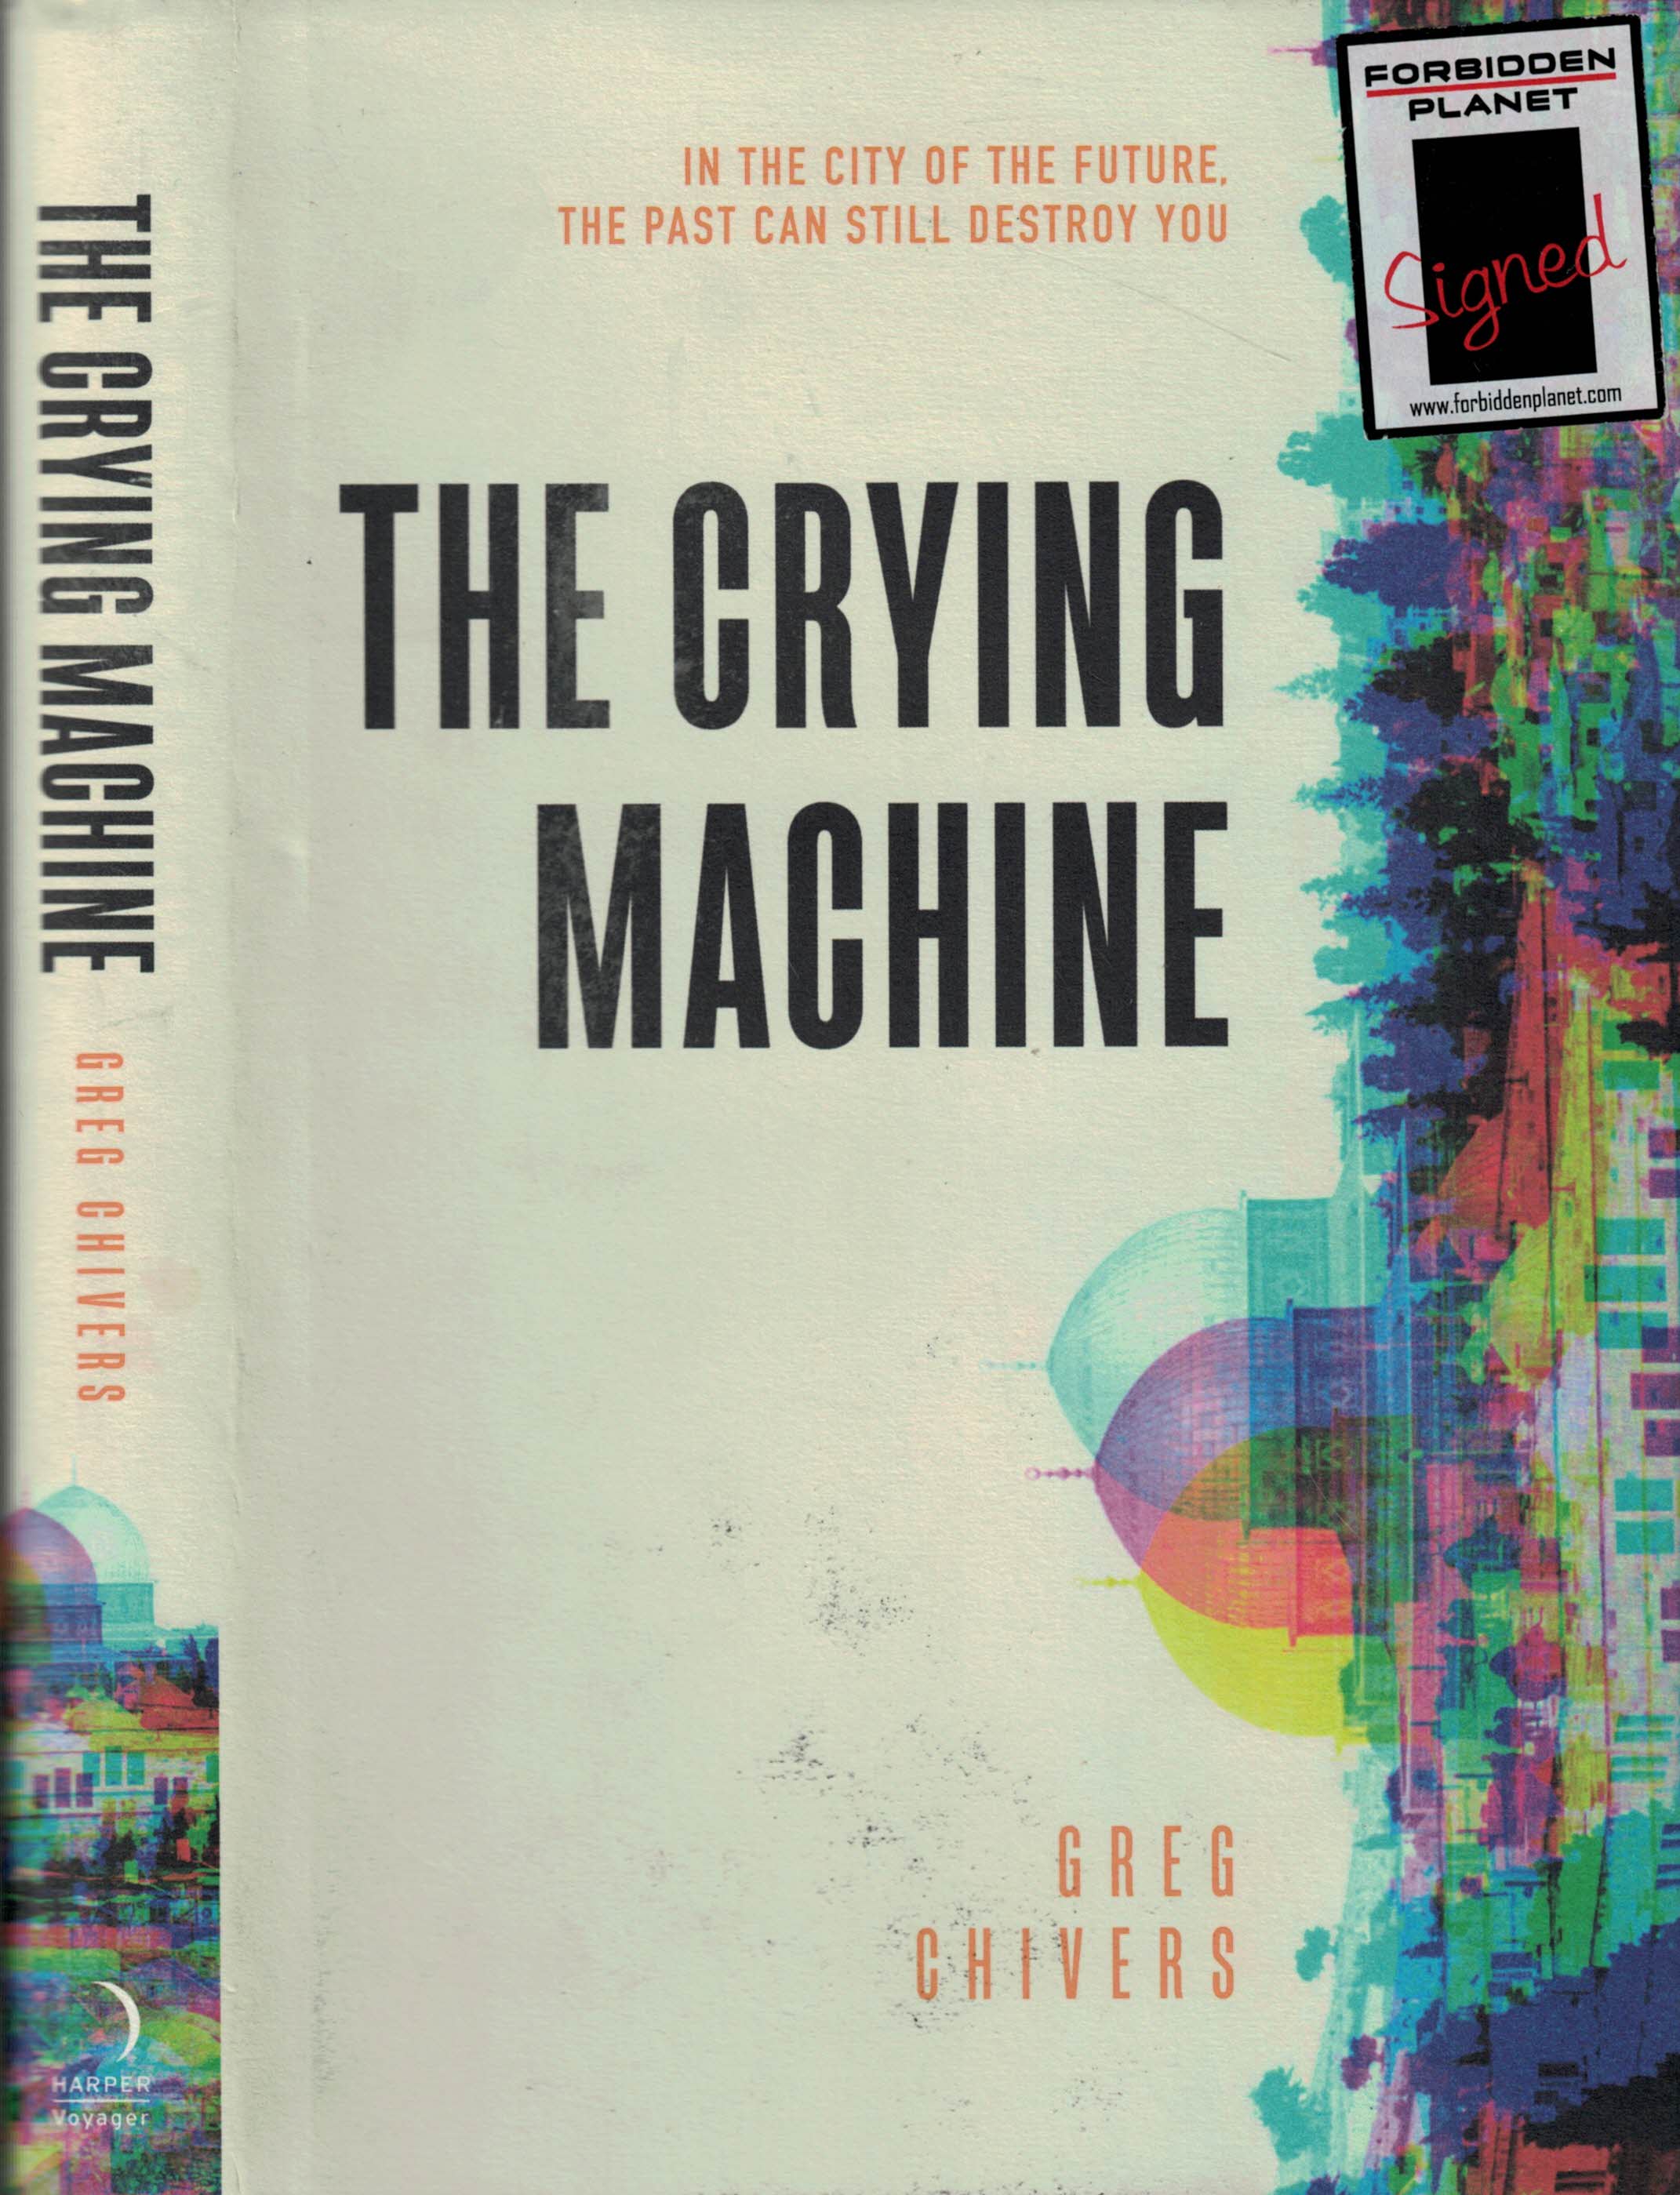 CHIVERS, GREG - The Crying Machine. Signed Copy